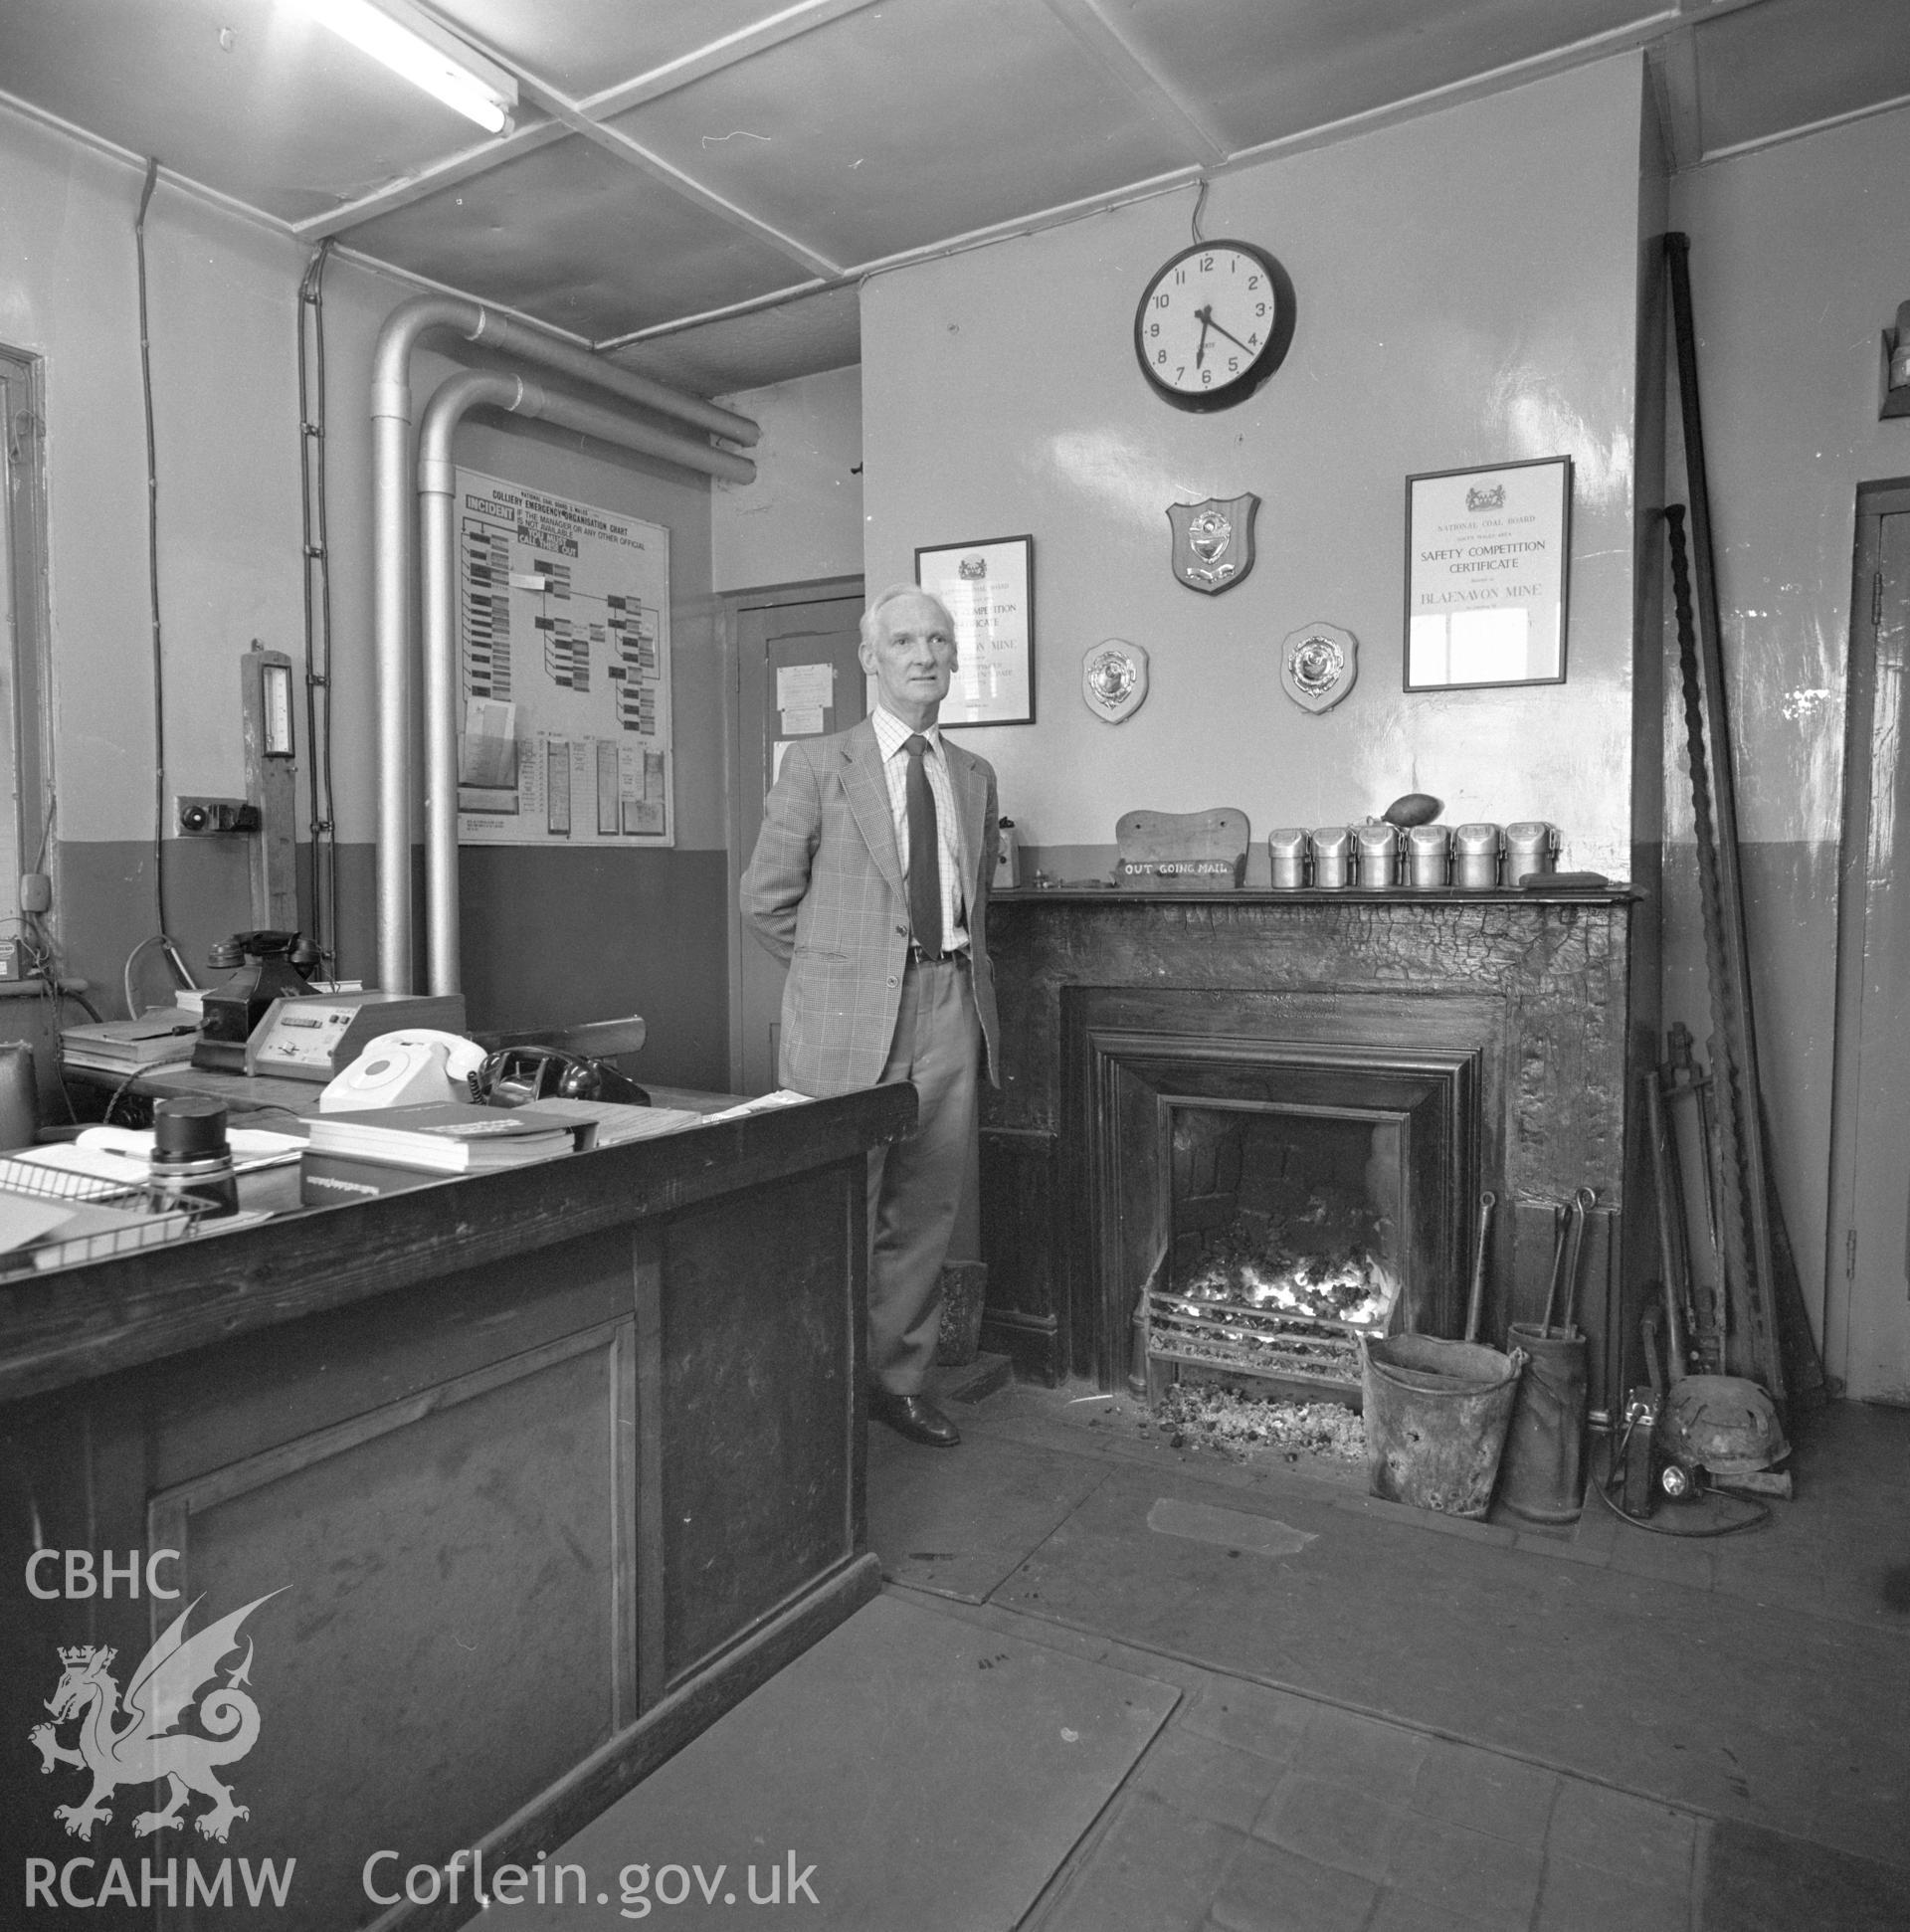 Digital copy of an acetate negative showing last NCB manager Glyn Morgan, at Big Pit,  from the John Cornwell Collection.